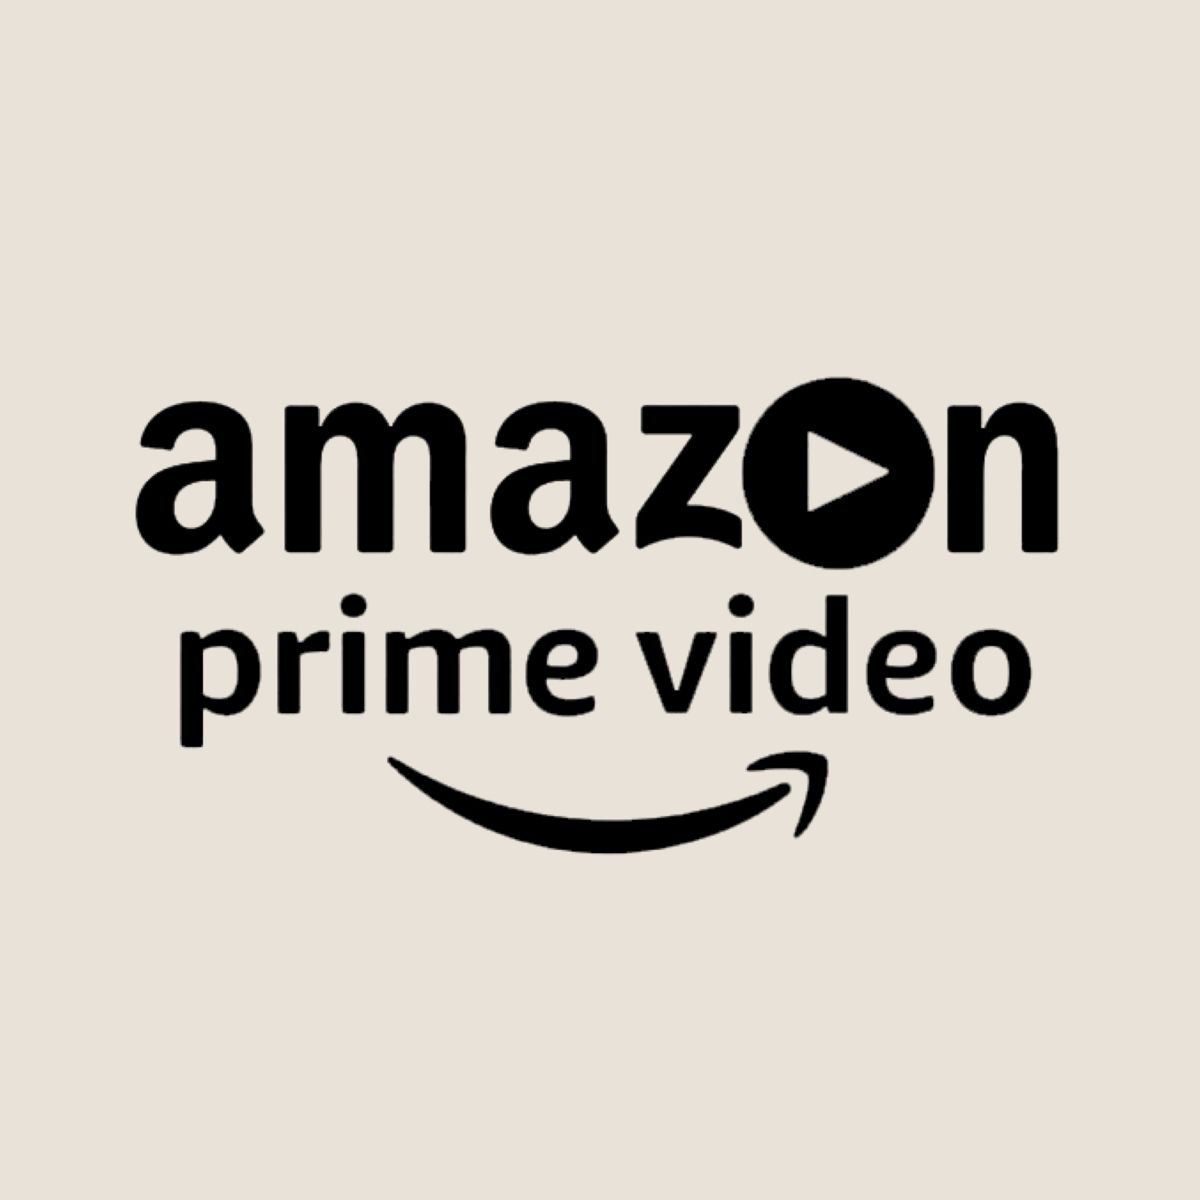 Amazon Prime Video Wallpapers Wallpaper Cave